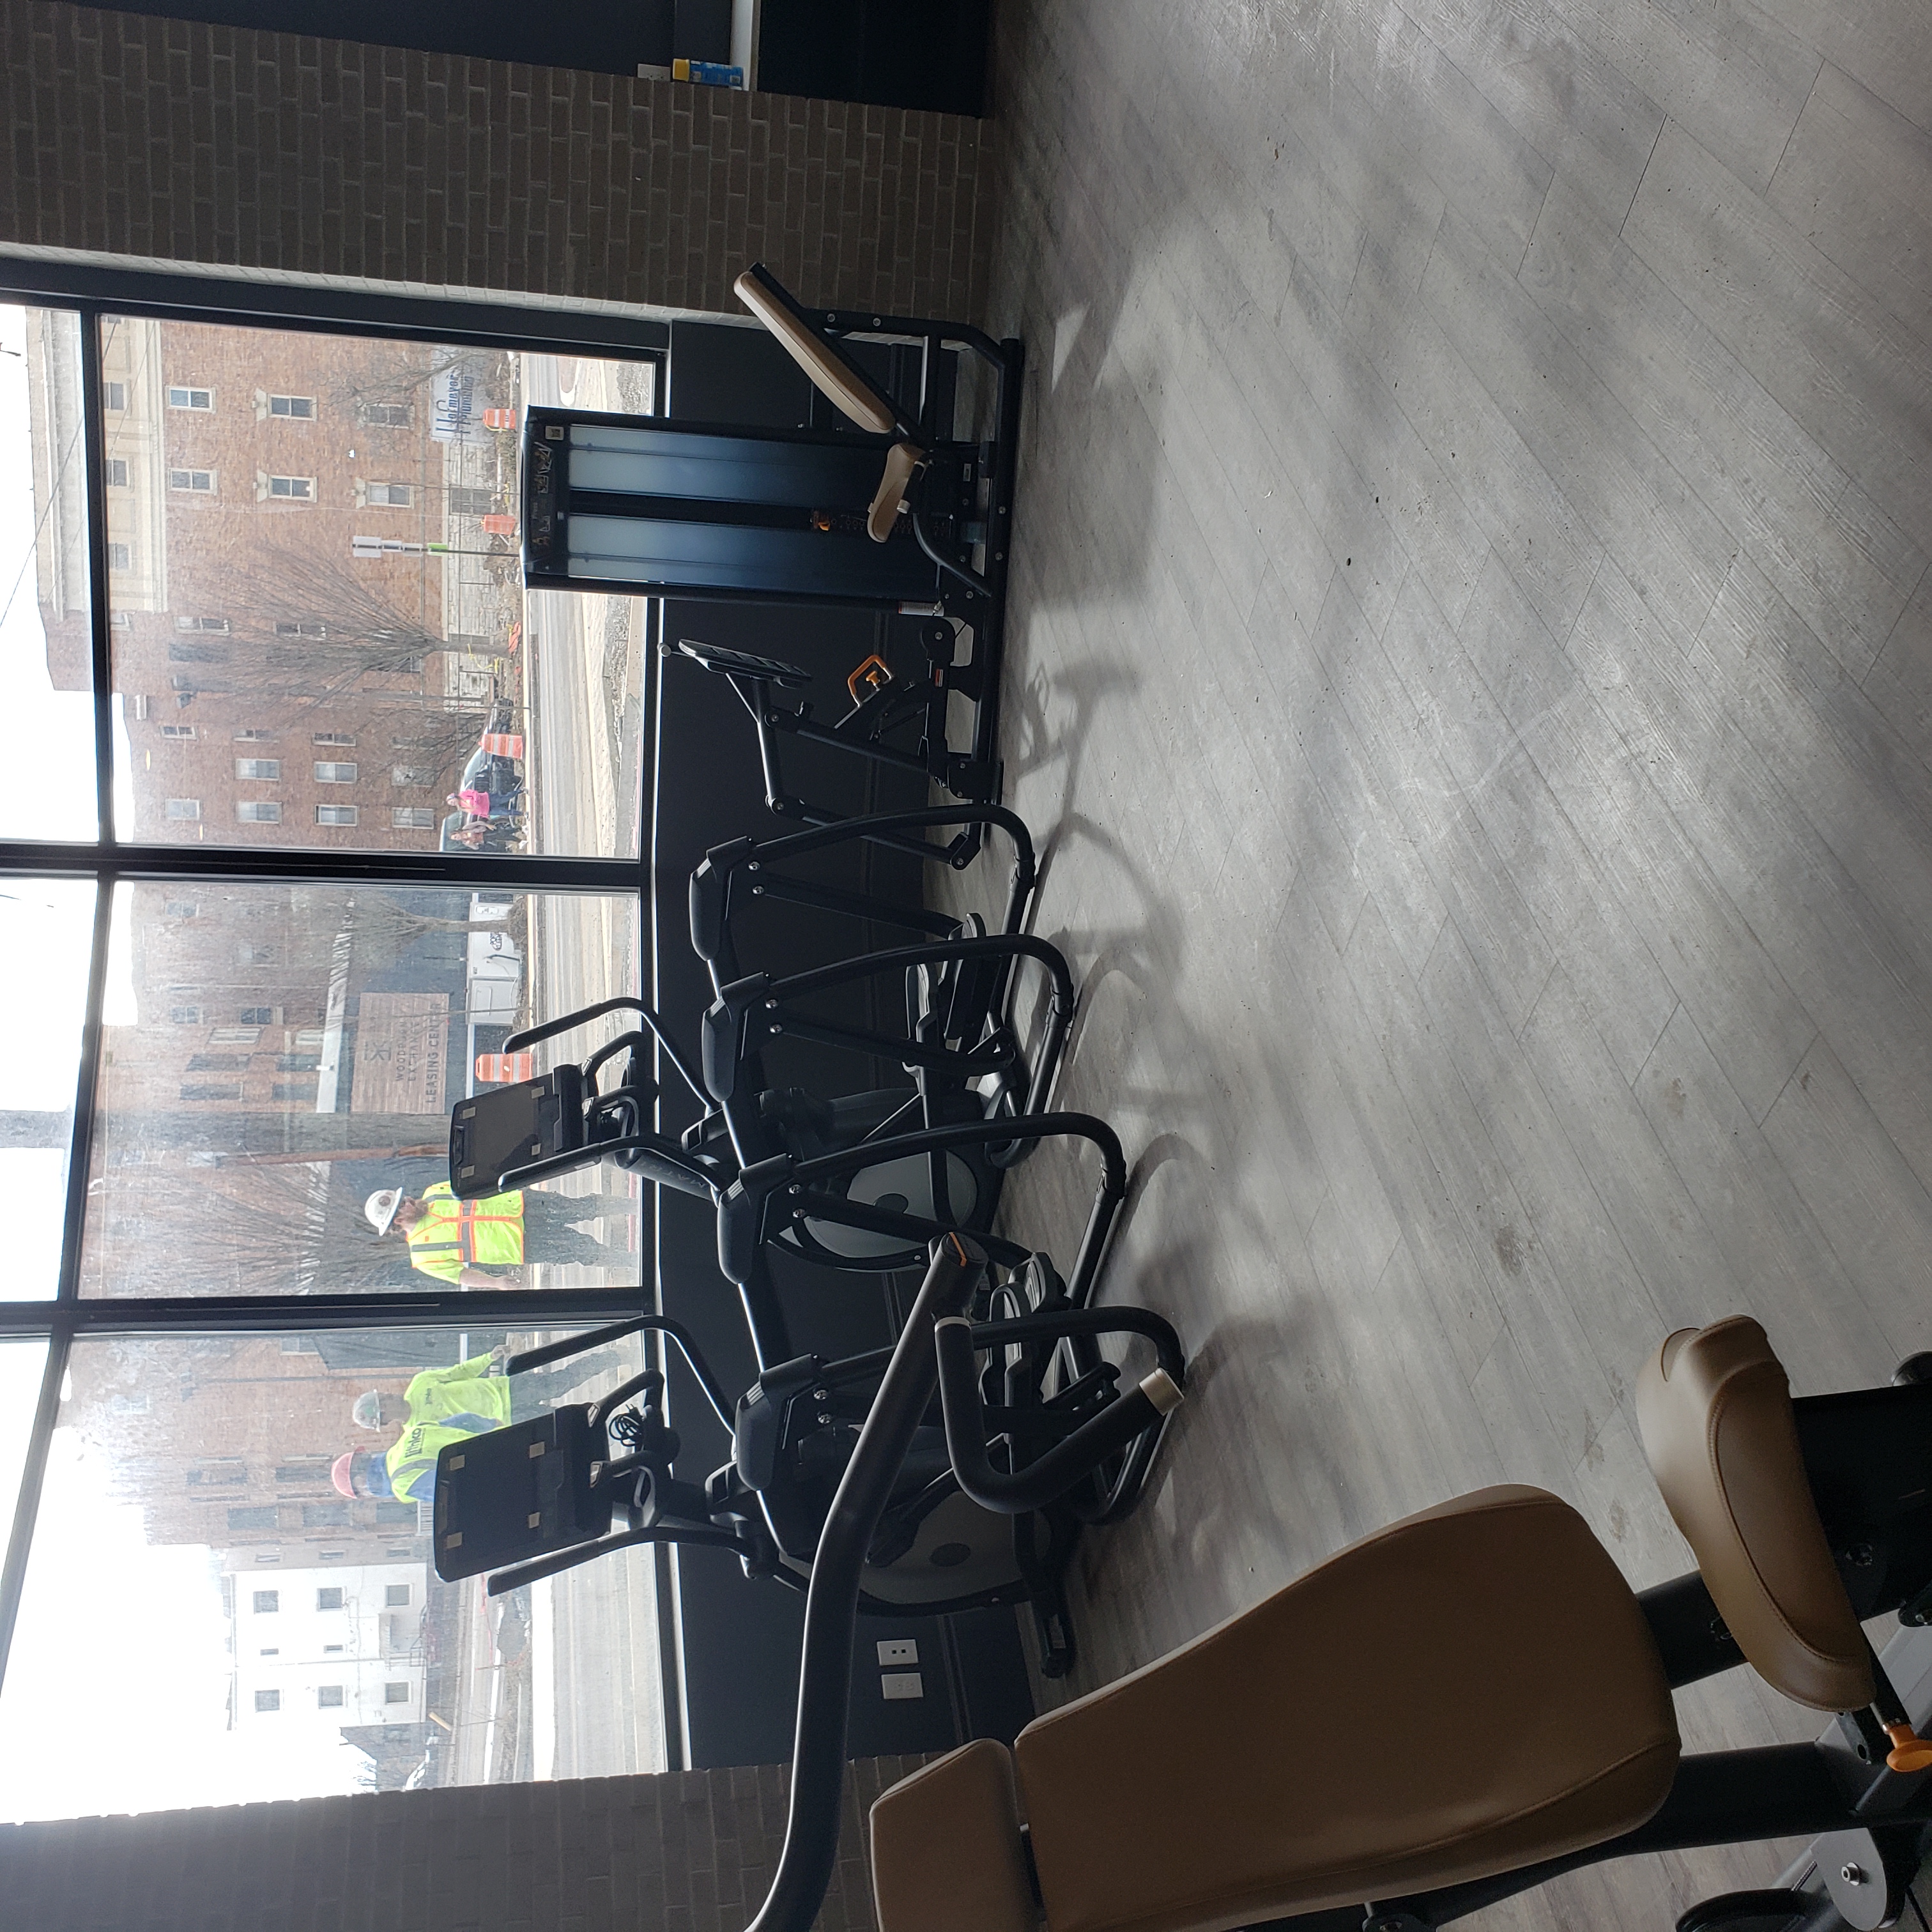 Two ellipticals in front of a window